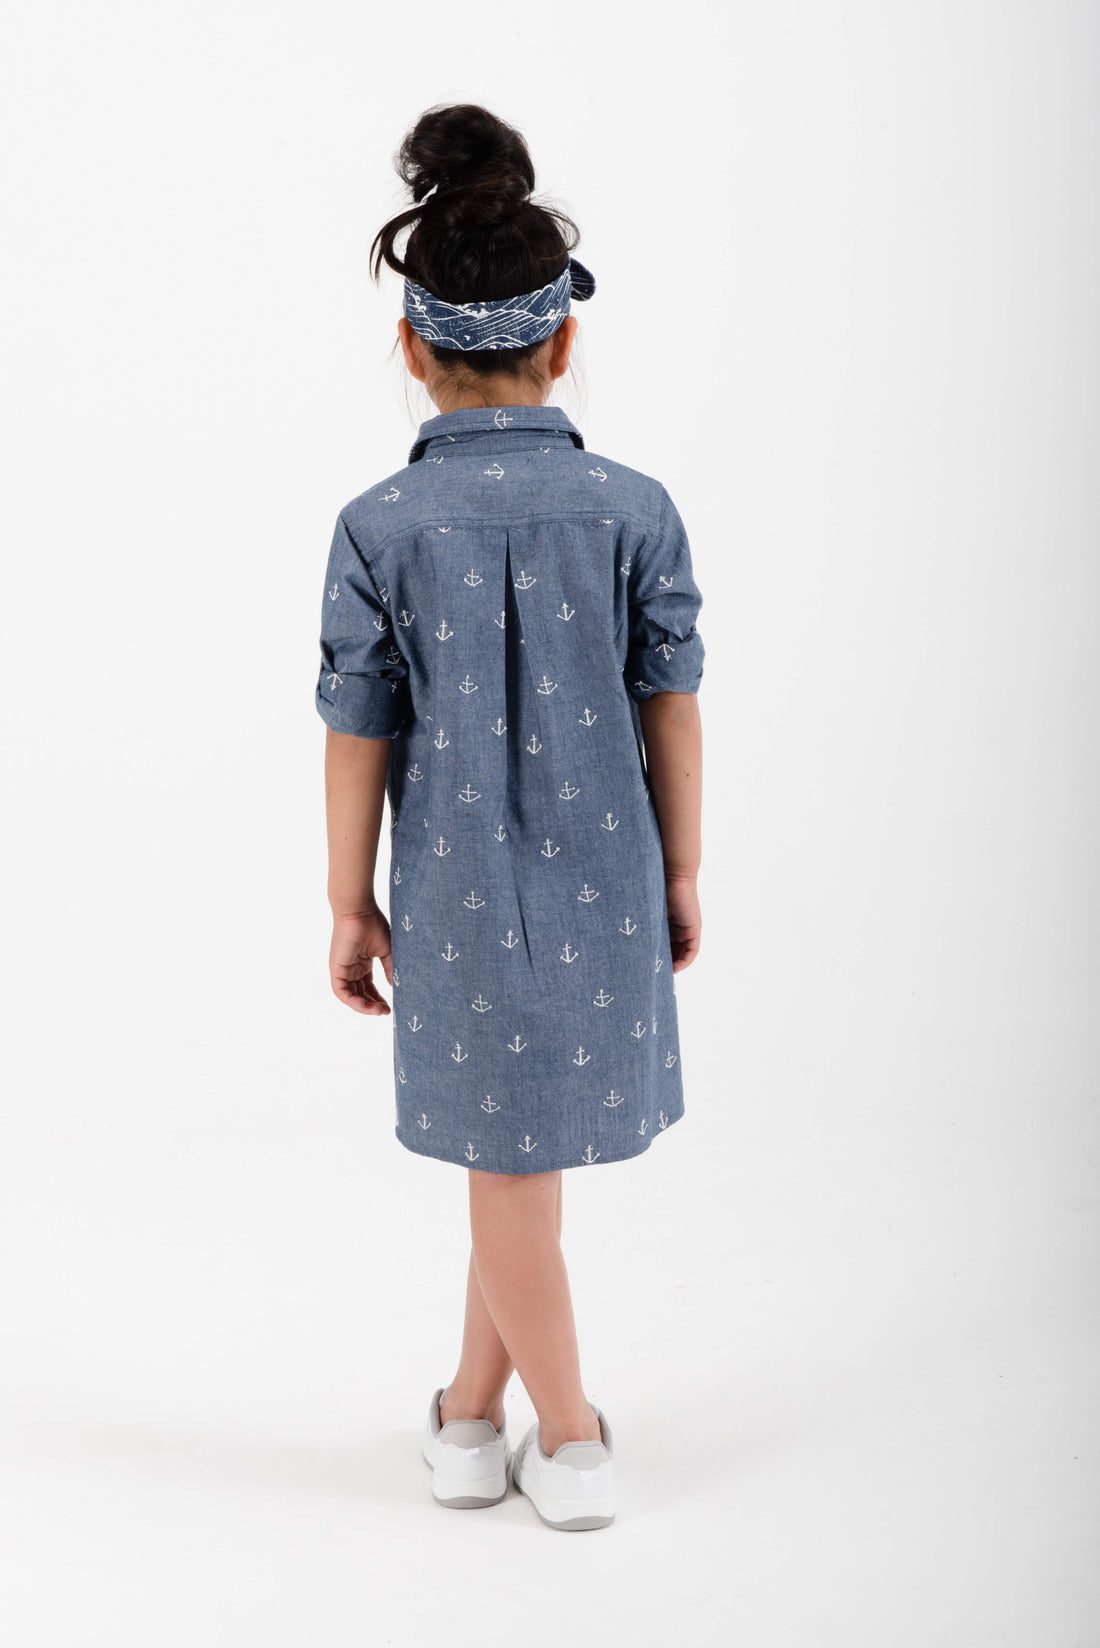 Sproet and Sprout Anchor Shirt Dress